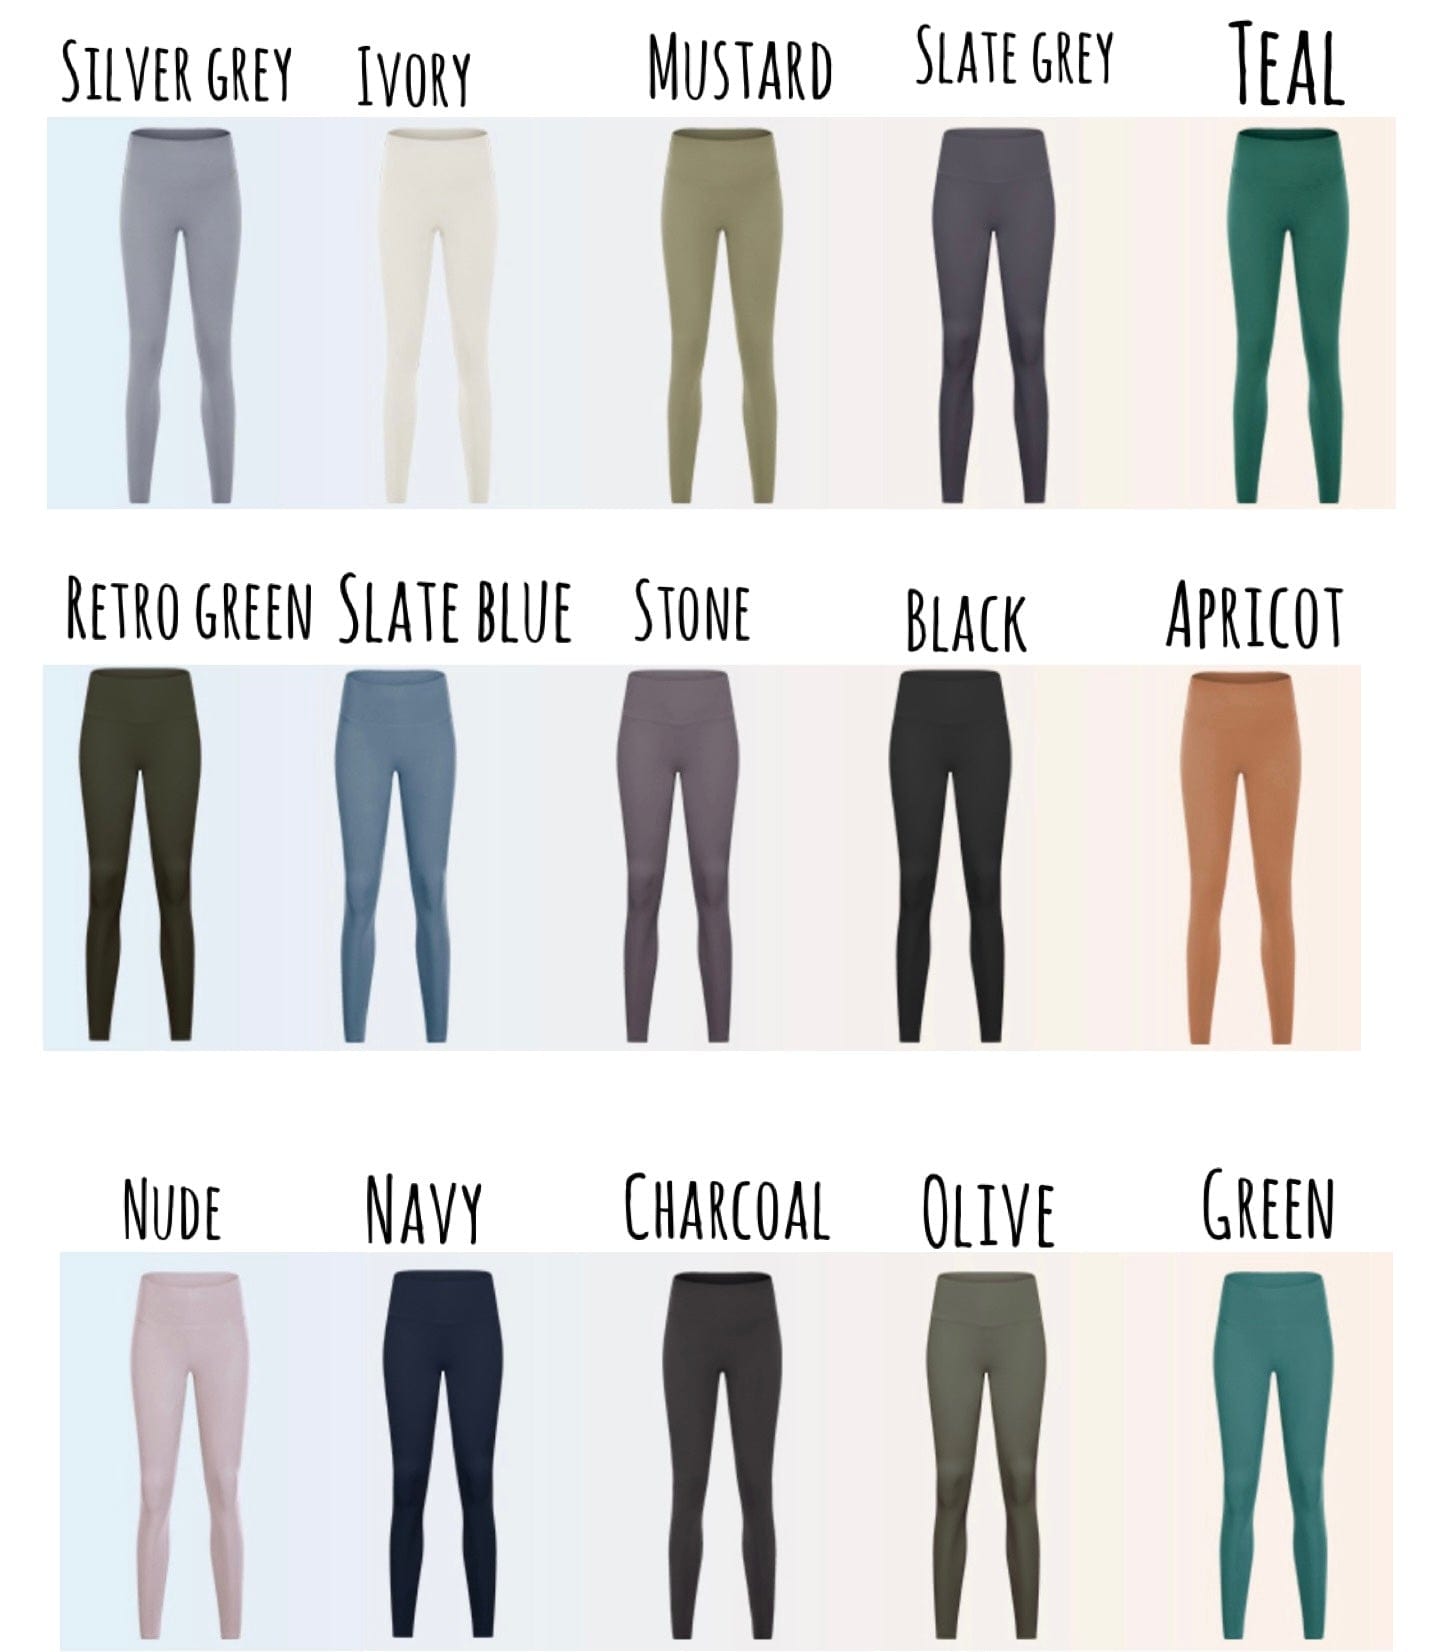 [BUNDLE DEAL BUY 4 FOR 15% OFF] Everyday naked feel seamless leggings  (23 inch inseam) - no elastic band (size 2 to size 12) (I)